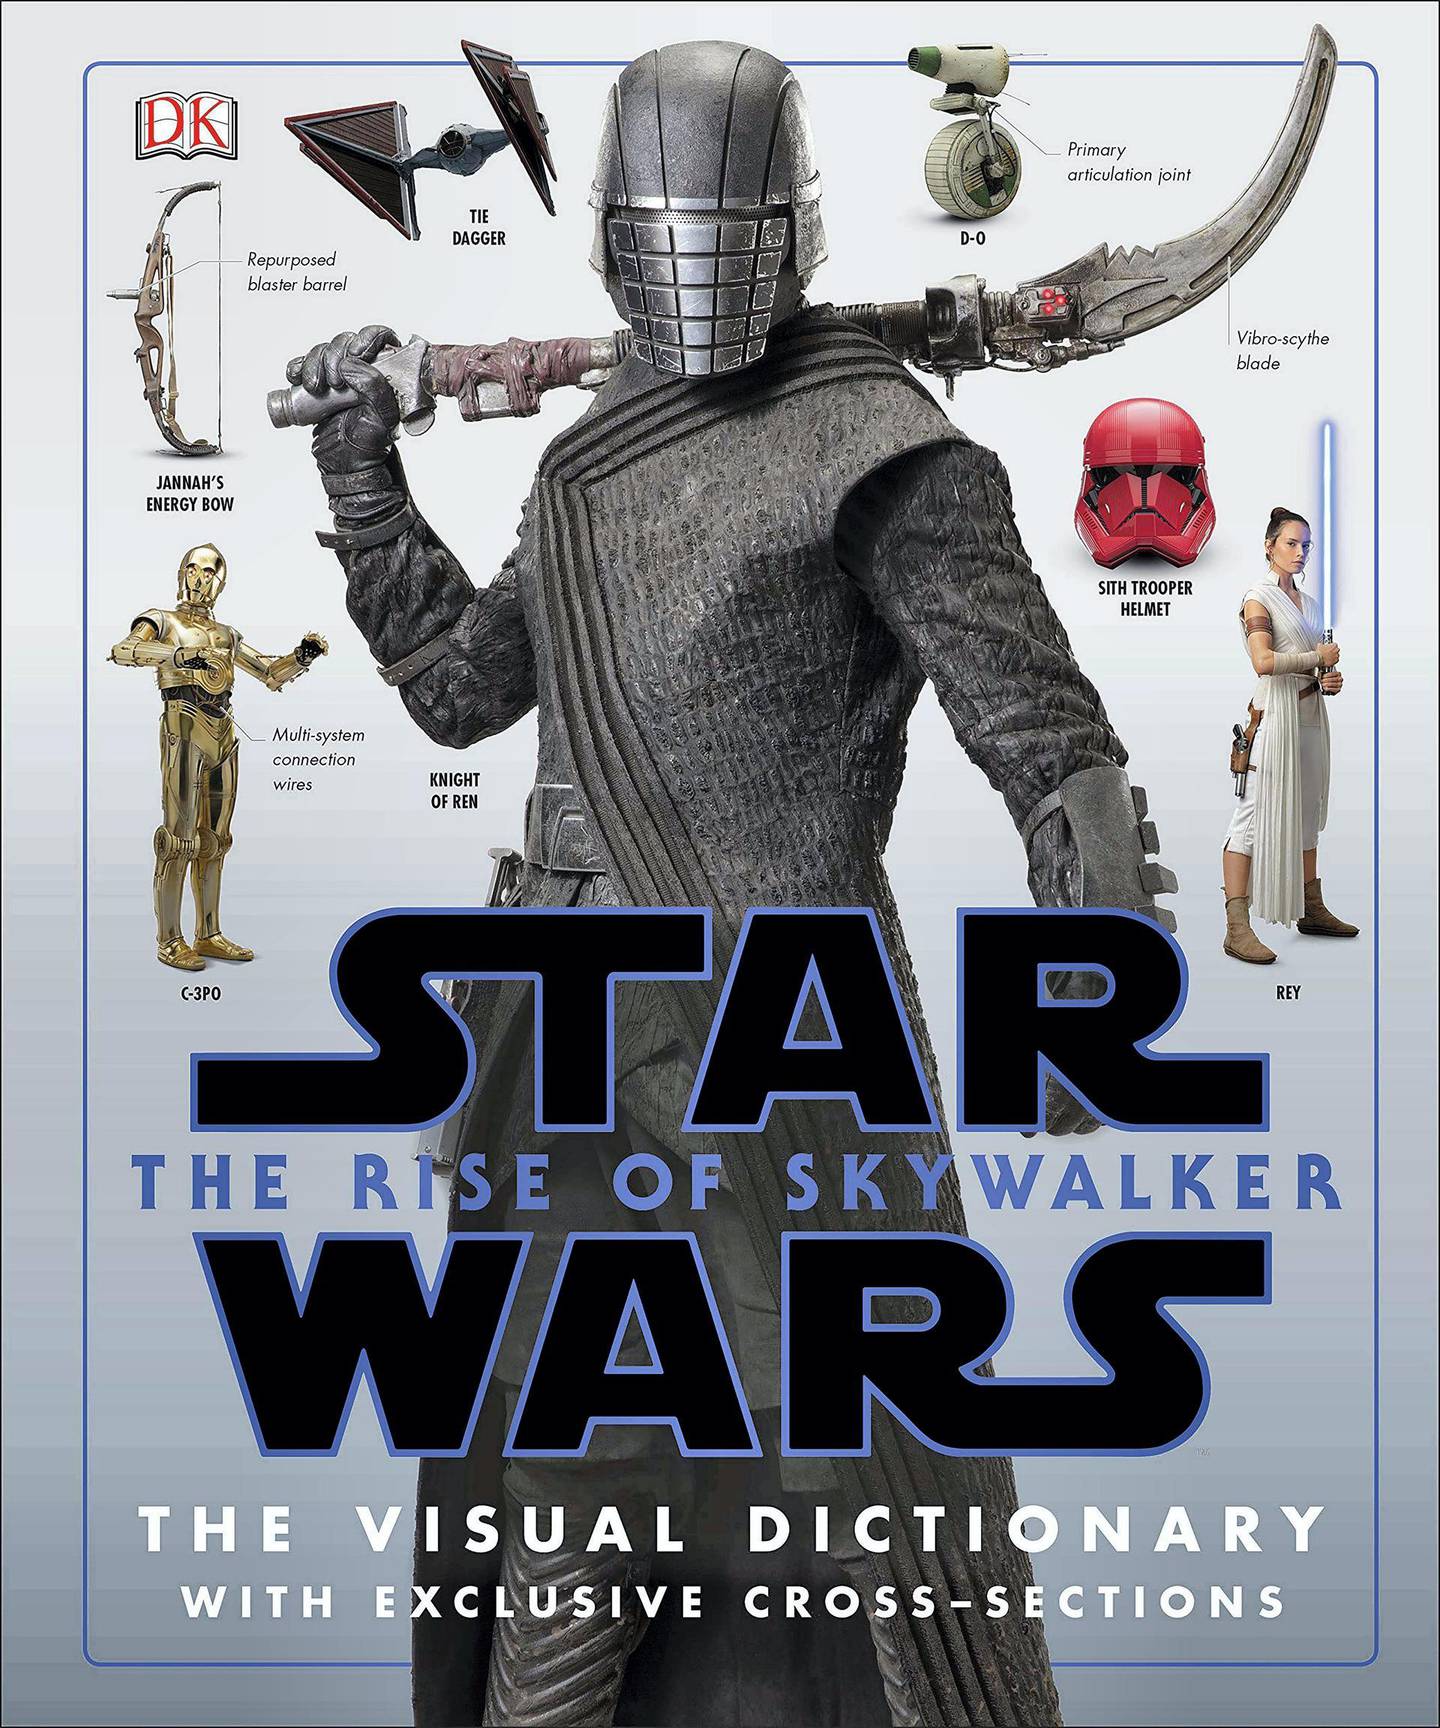 Star Wars The Rise of Skywalker The Visual Dictionary by Pablo Hidalgo. DK Children